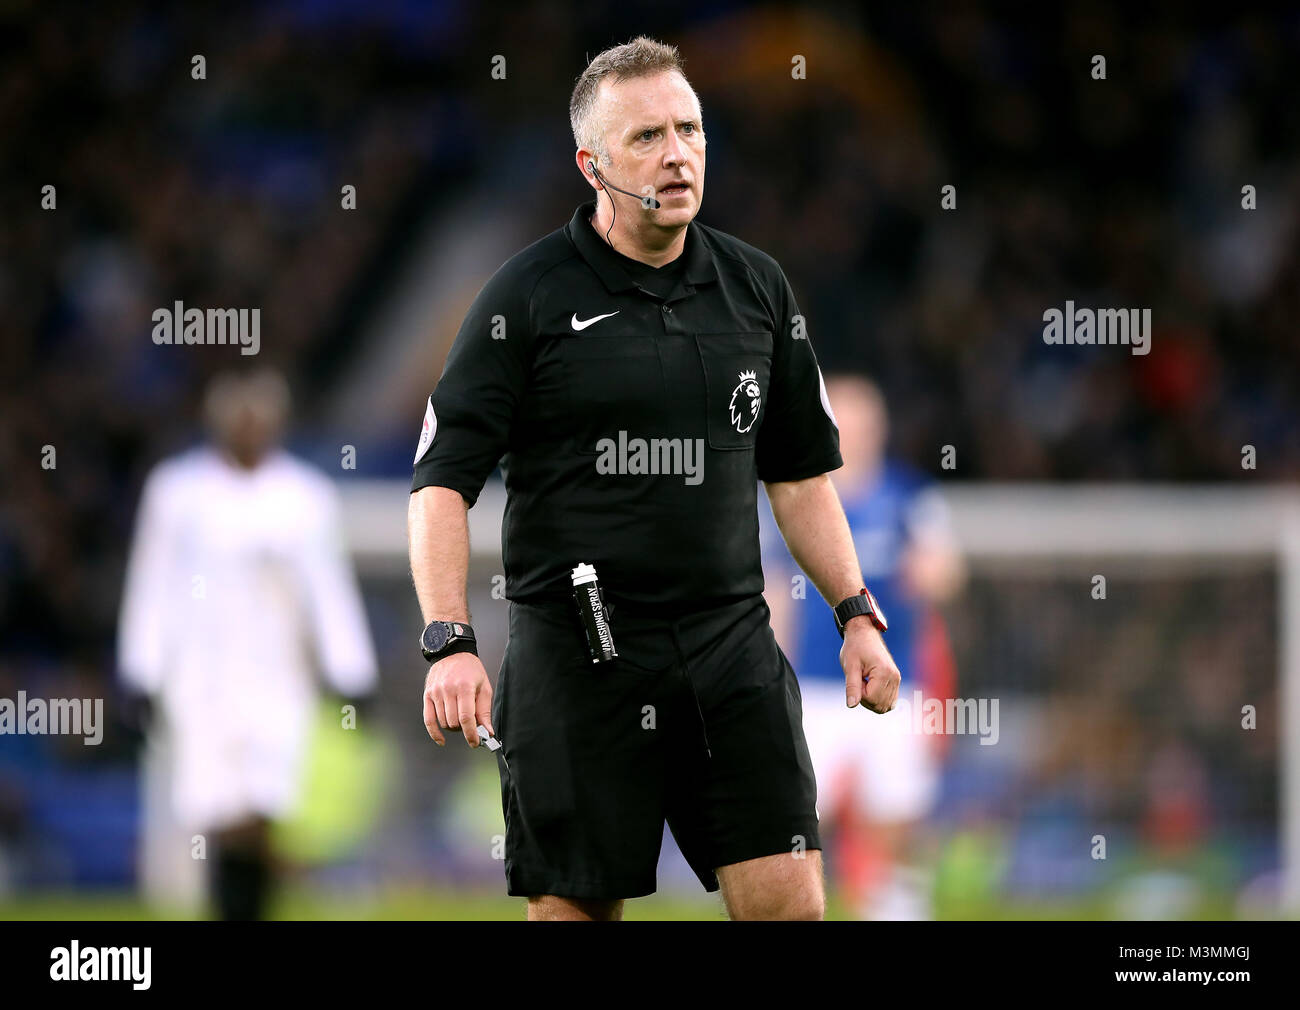 Referee Jonathan Moss during the Premier League match at Goodison Park, Liverpool. PRESS ASSOCIATION Photo. Picture date: Saturday February 10, 2018. See PA story SOCCER Everton. Photo credit should read: Nick Potts/PA Wire. RESTRICTIONS: No use with unauthorised audio, video, data, fixture lists, club/league logos or 'live' services. Online in-match use limited to 75 images, no video emulation. No use in betting, games or single club/league/player publications. Stock Photo